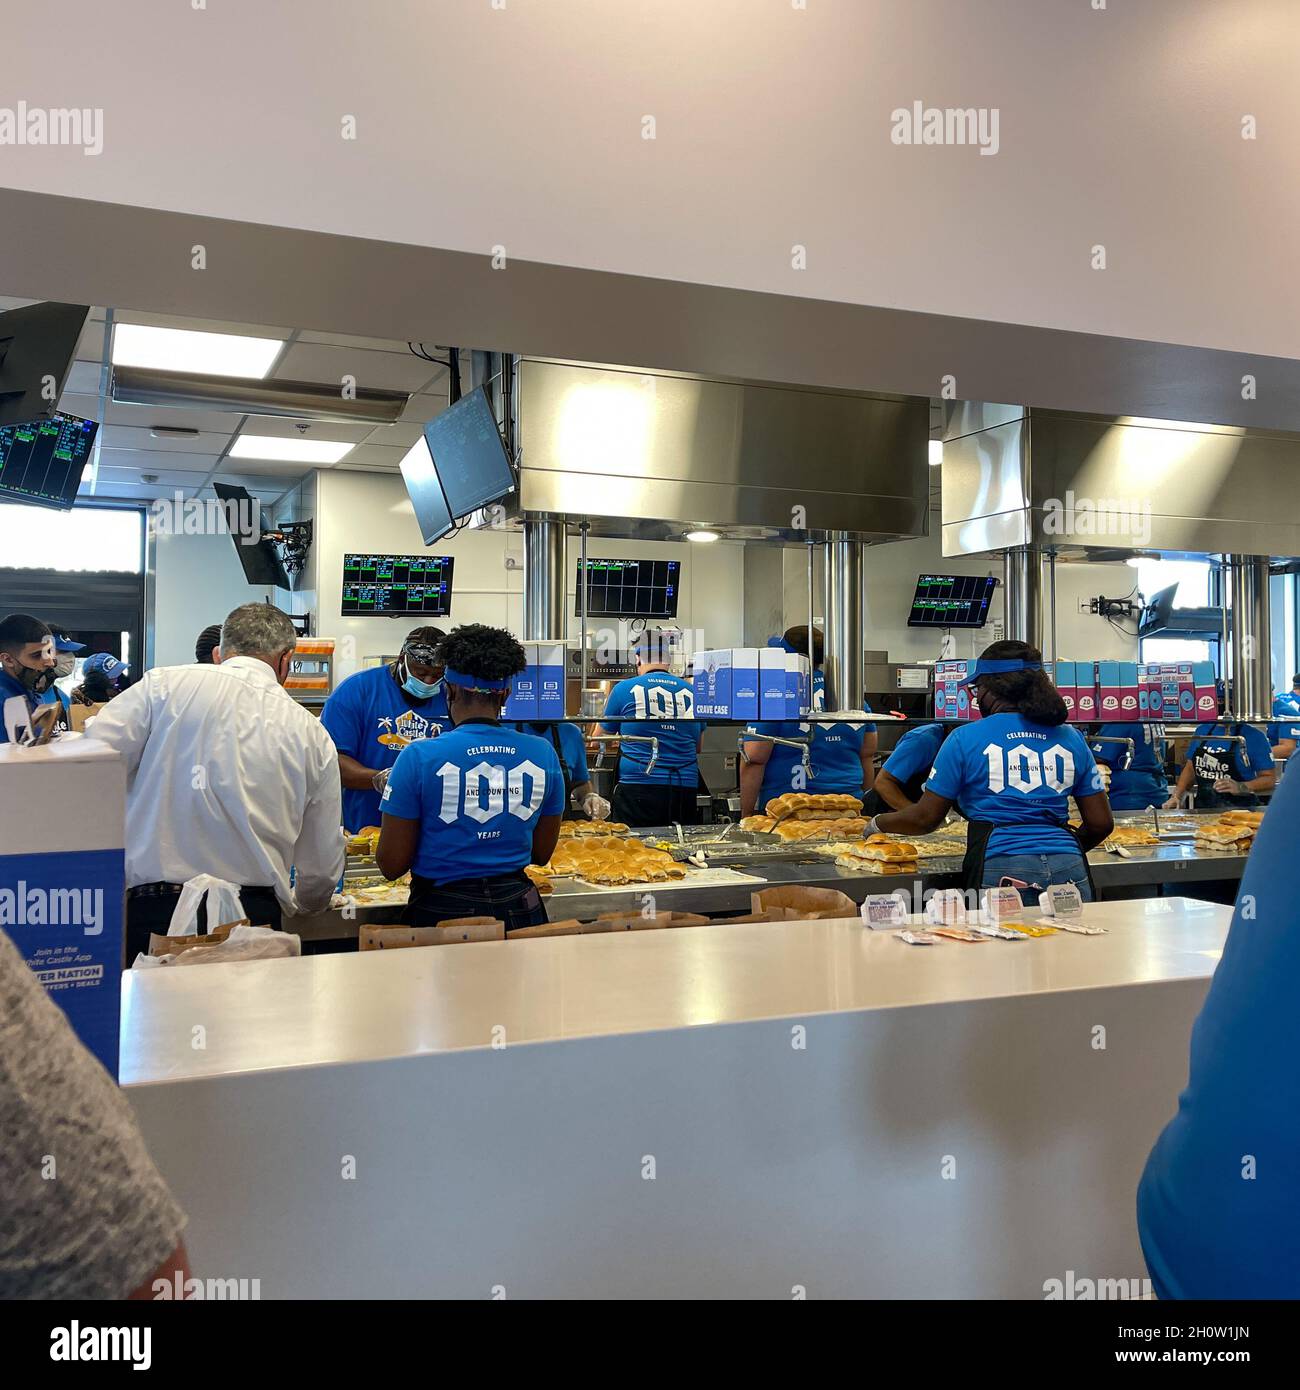 Orlando, FL USA -  June 8, 2021: The interior of a White Castle fast food restaurant with employees serving food in Orlando, Florida. Stock Photo